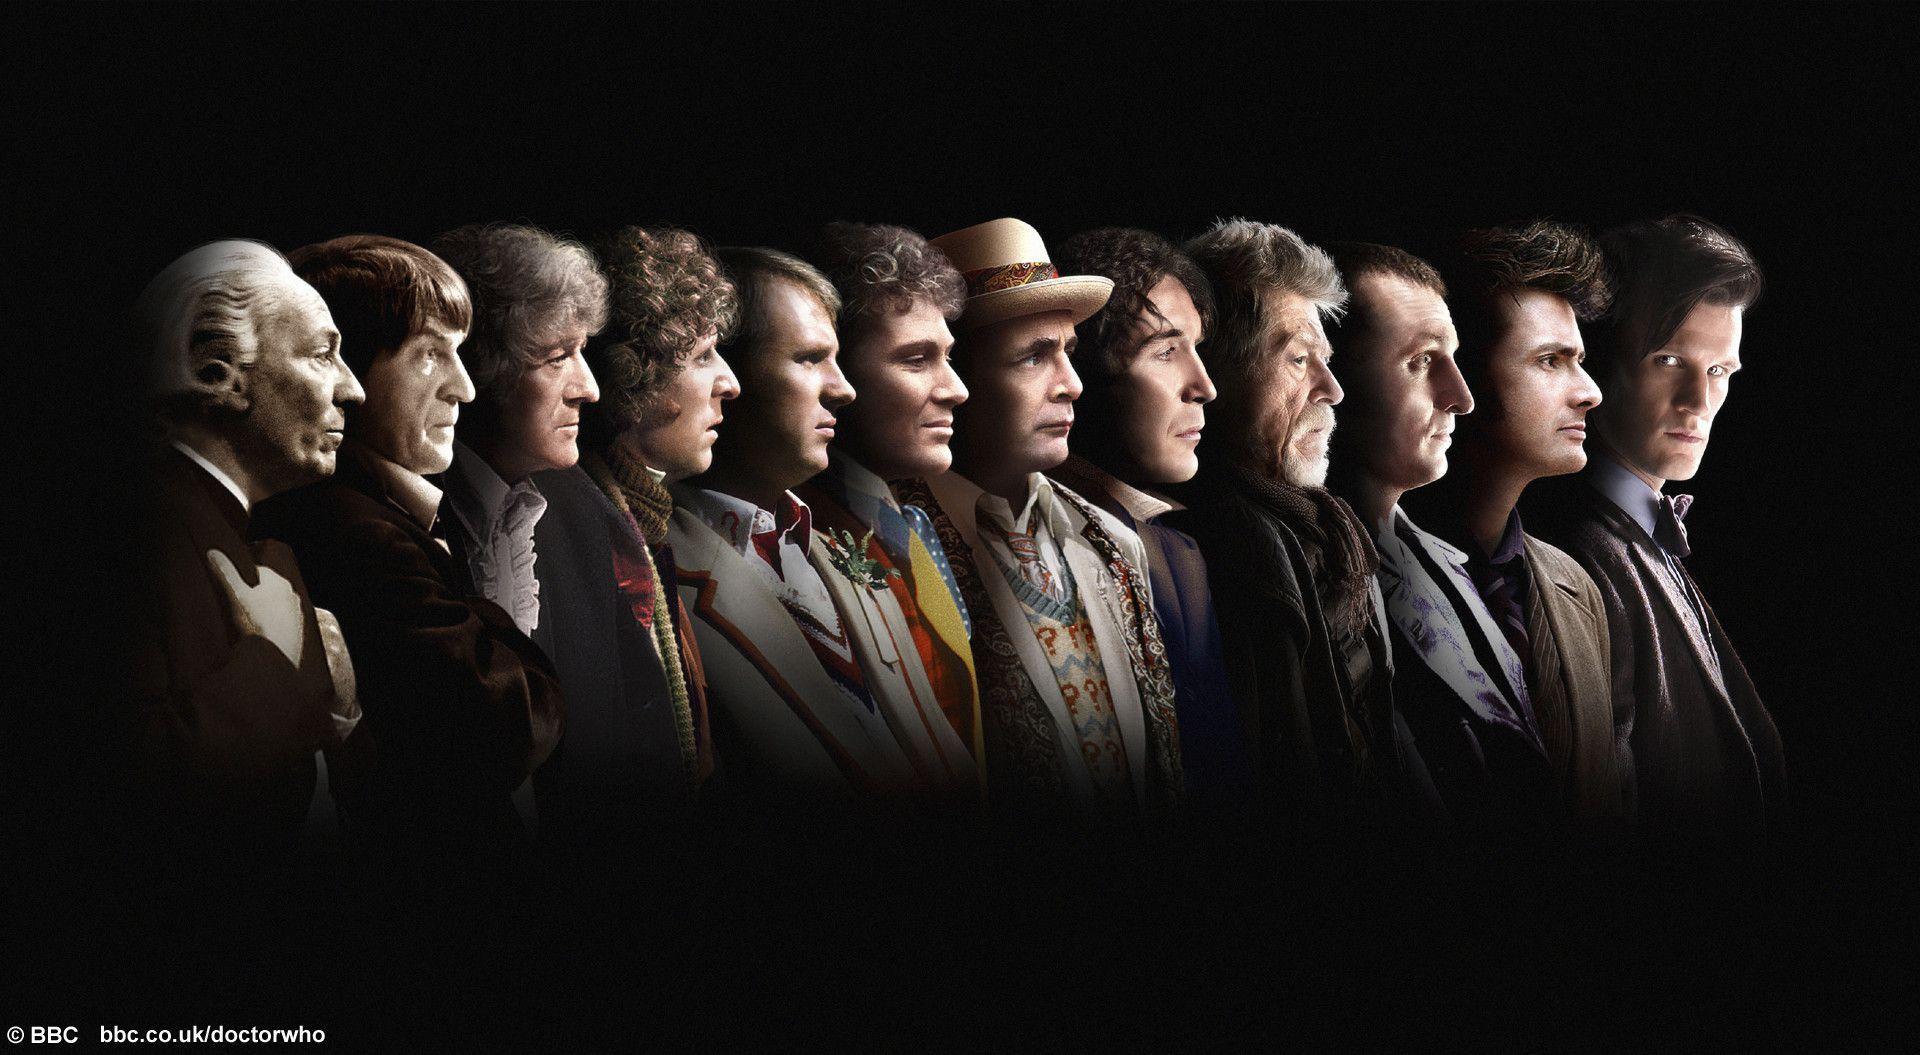 doctor who wallpaper 1920x1080